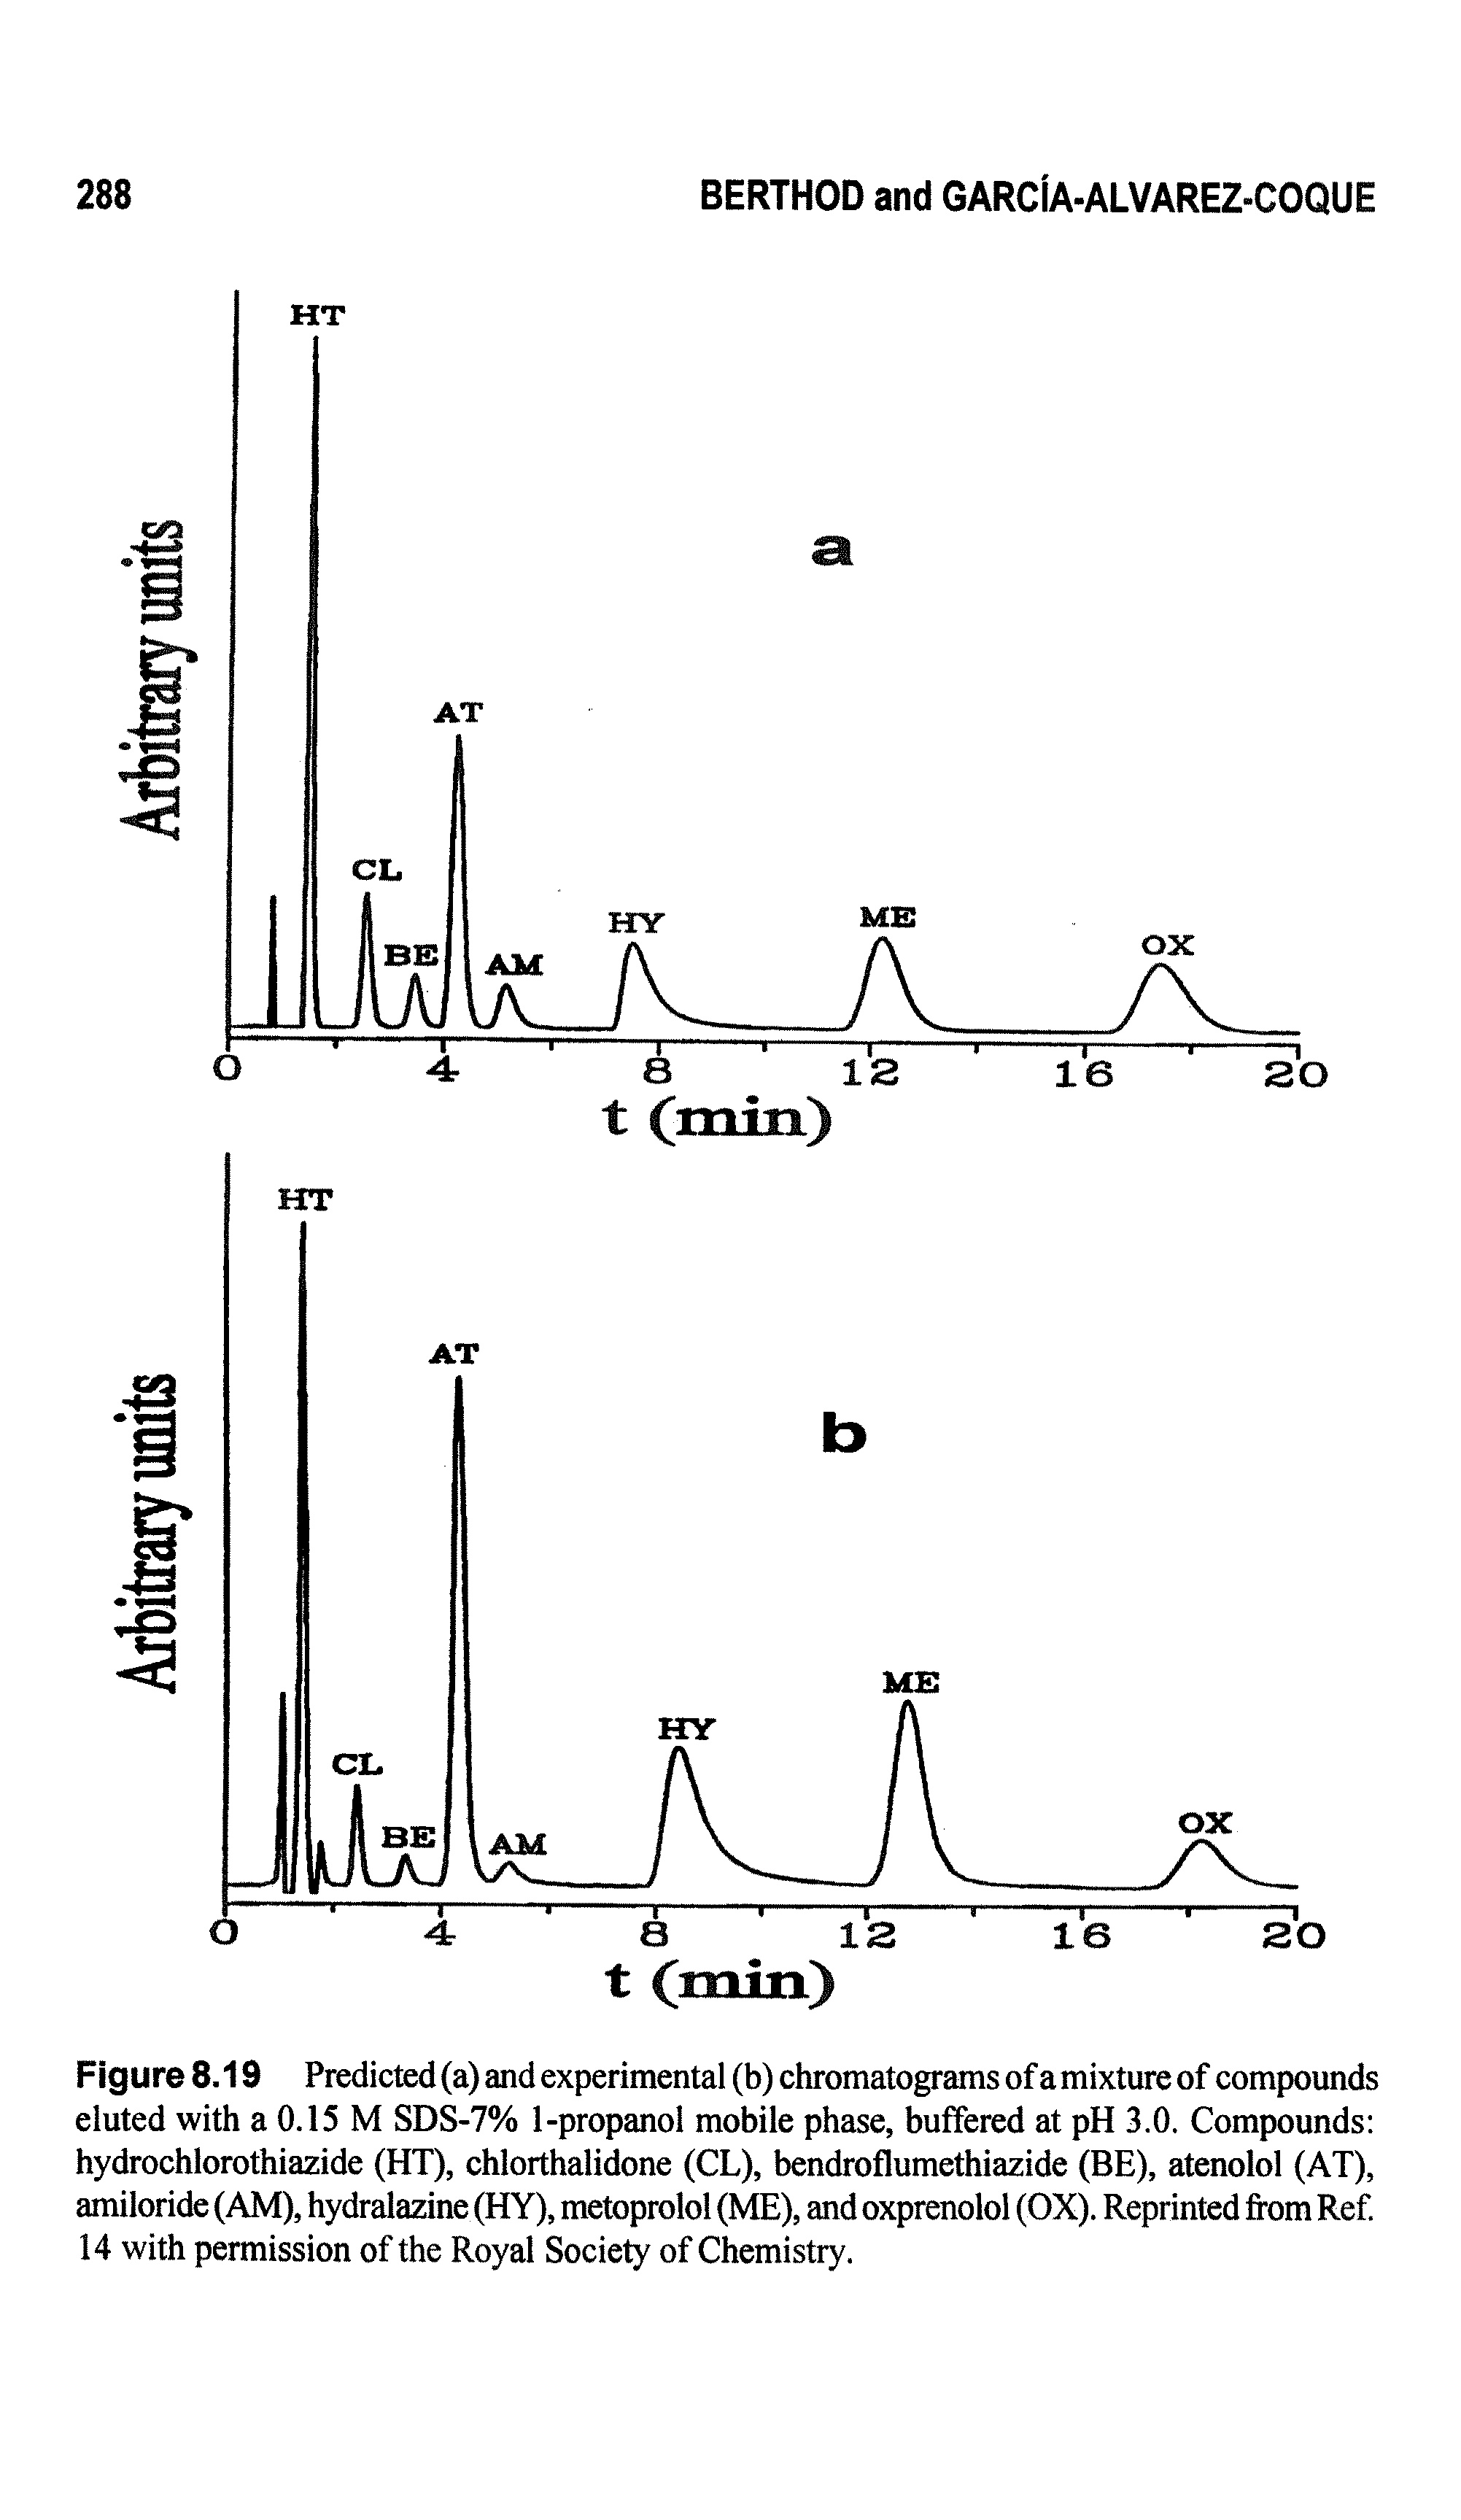 Figure8.19 Predicted(a)andexperimental(b)chromatogramsofamixtureof compounds eluted with a 0.15 M SDS-7% 1-propanol mobile phase, buffered at pH 3.0. Compounds hydrochlorothiazide (HT), chlorthalidone (CL), bendroflumethiazide (BE), atenolol (AT), amiloride (AM), hydralazine (HY), metoprolol (ME), and oxprenolol (OX). Reprinted from Ref. 14 with permission of the Royal Society of Chemistry.